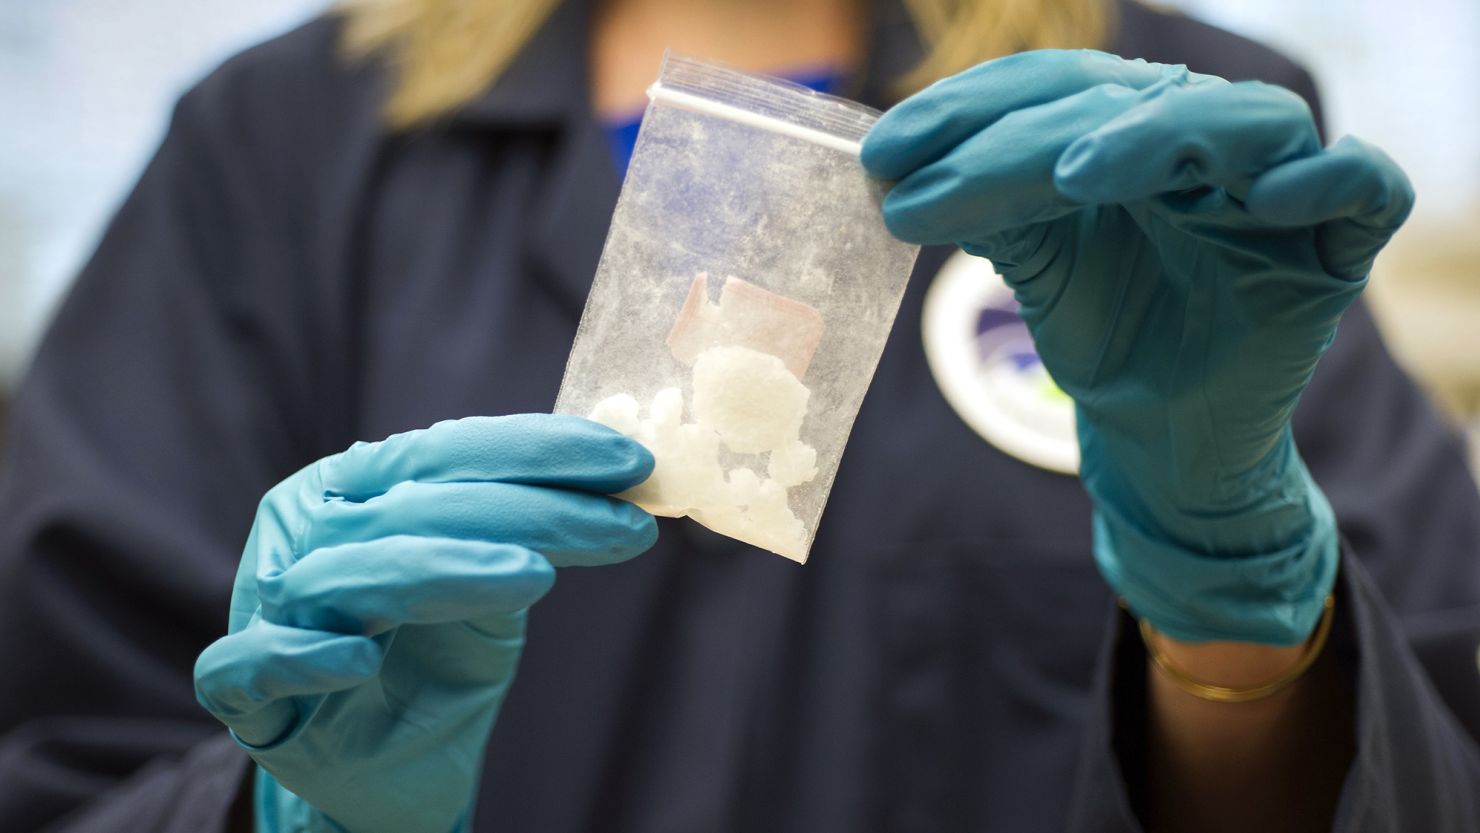 FILE - In this Aug. 9, 2016, file photo, a bag of 4-fluoro isobutyryl fentanyl which was seized in a drug raid is displayed at the Drug Enforcement Administration (DEA) Special Testing and Research Laboratory in Sterling, Va. Acting United States DEA administrator Chuck Rosenberg will visit China next week amid efforts to cut off the Chinese supply of deadly synthetic drugs, like fentanyl. China disputes U.S. claims that it's the top source of opioids. Still, Beijing has already banned fentanyl, an opioid some 50 times stronger than heroin, and 18 related compounds. (AP Photo/Cliff Owen, File)